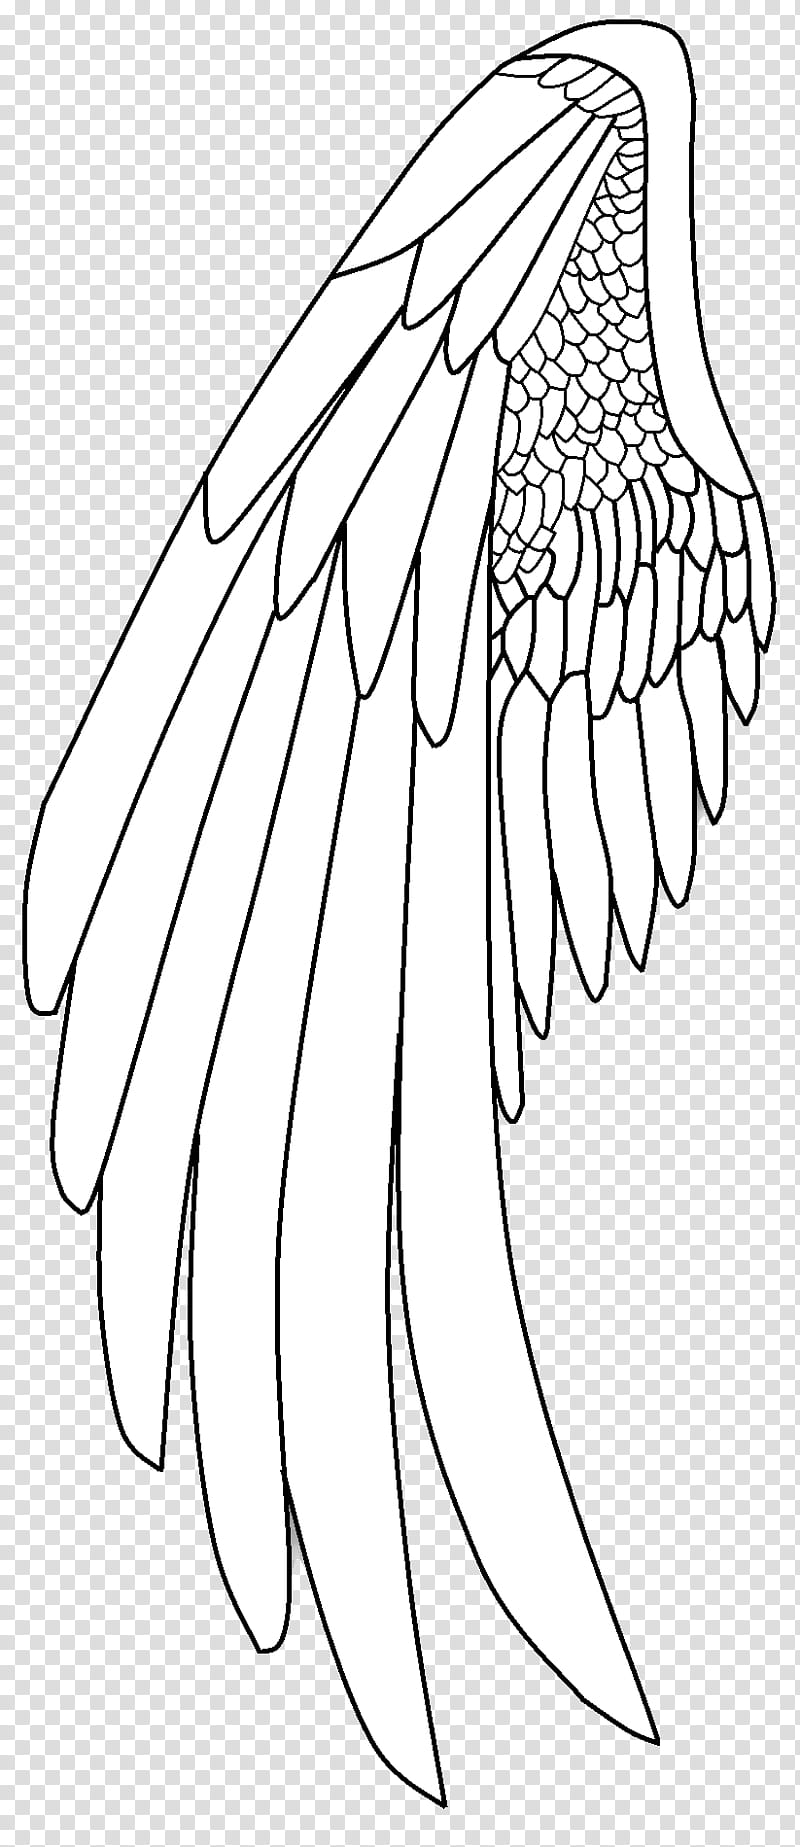 Black And White Flower, Drawing, Line Art, Painting, Angel, Finger, Tattoo, Character transparent background PNG clipart